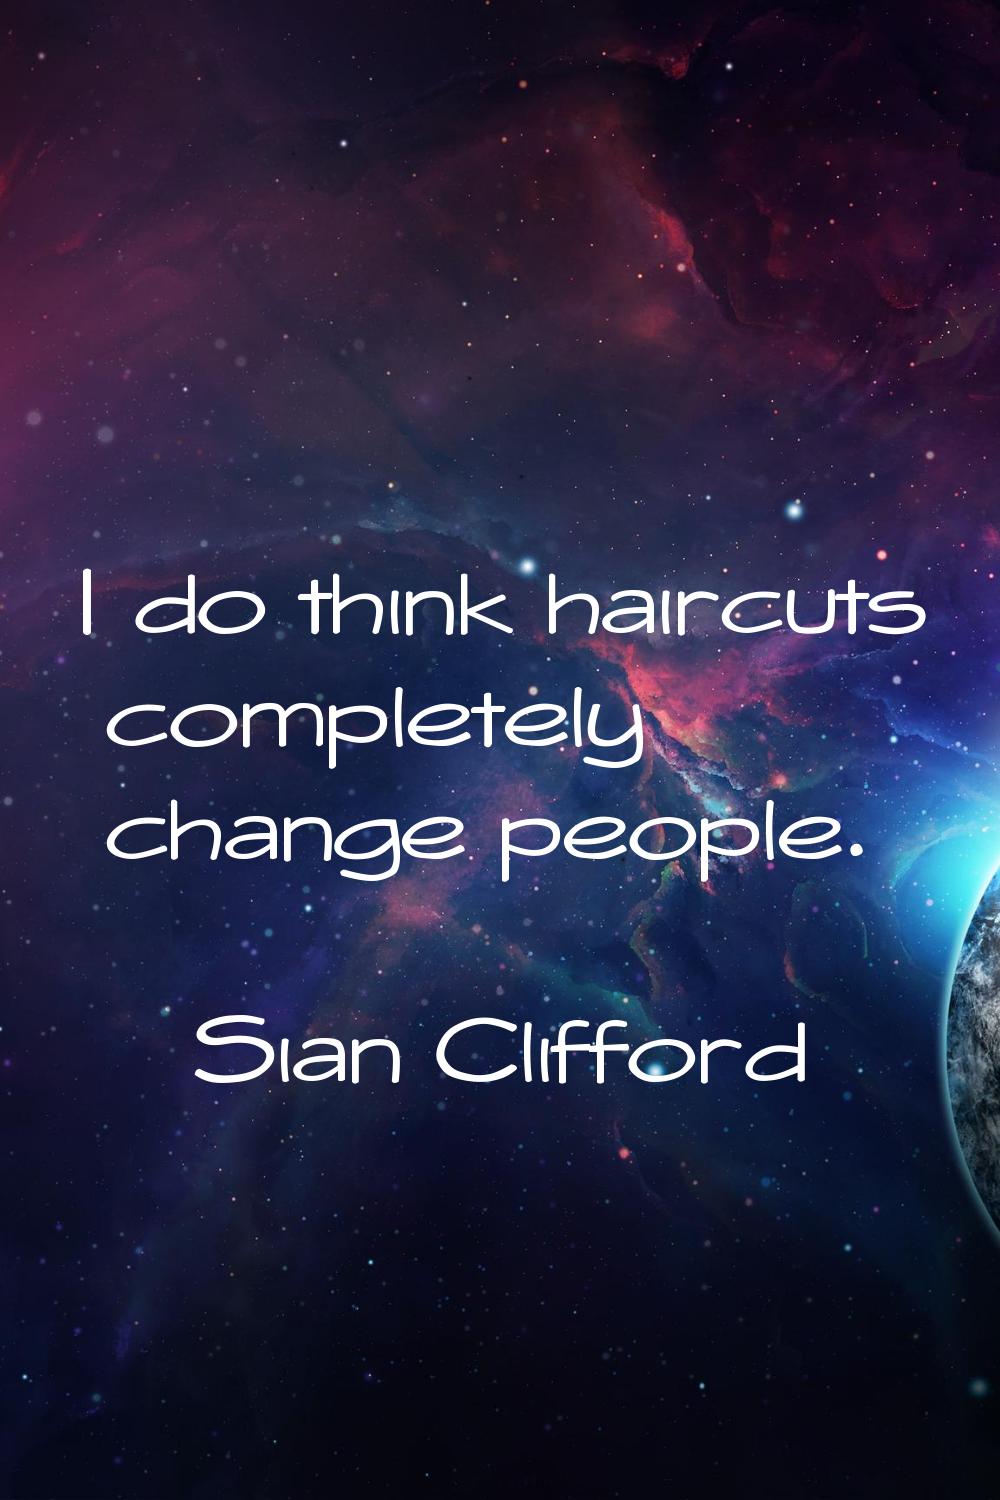 I do think haircuts completely change people.